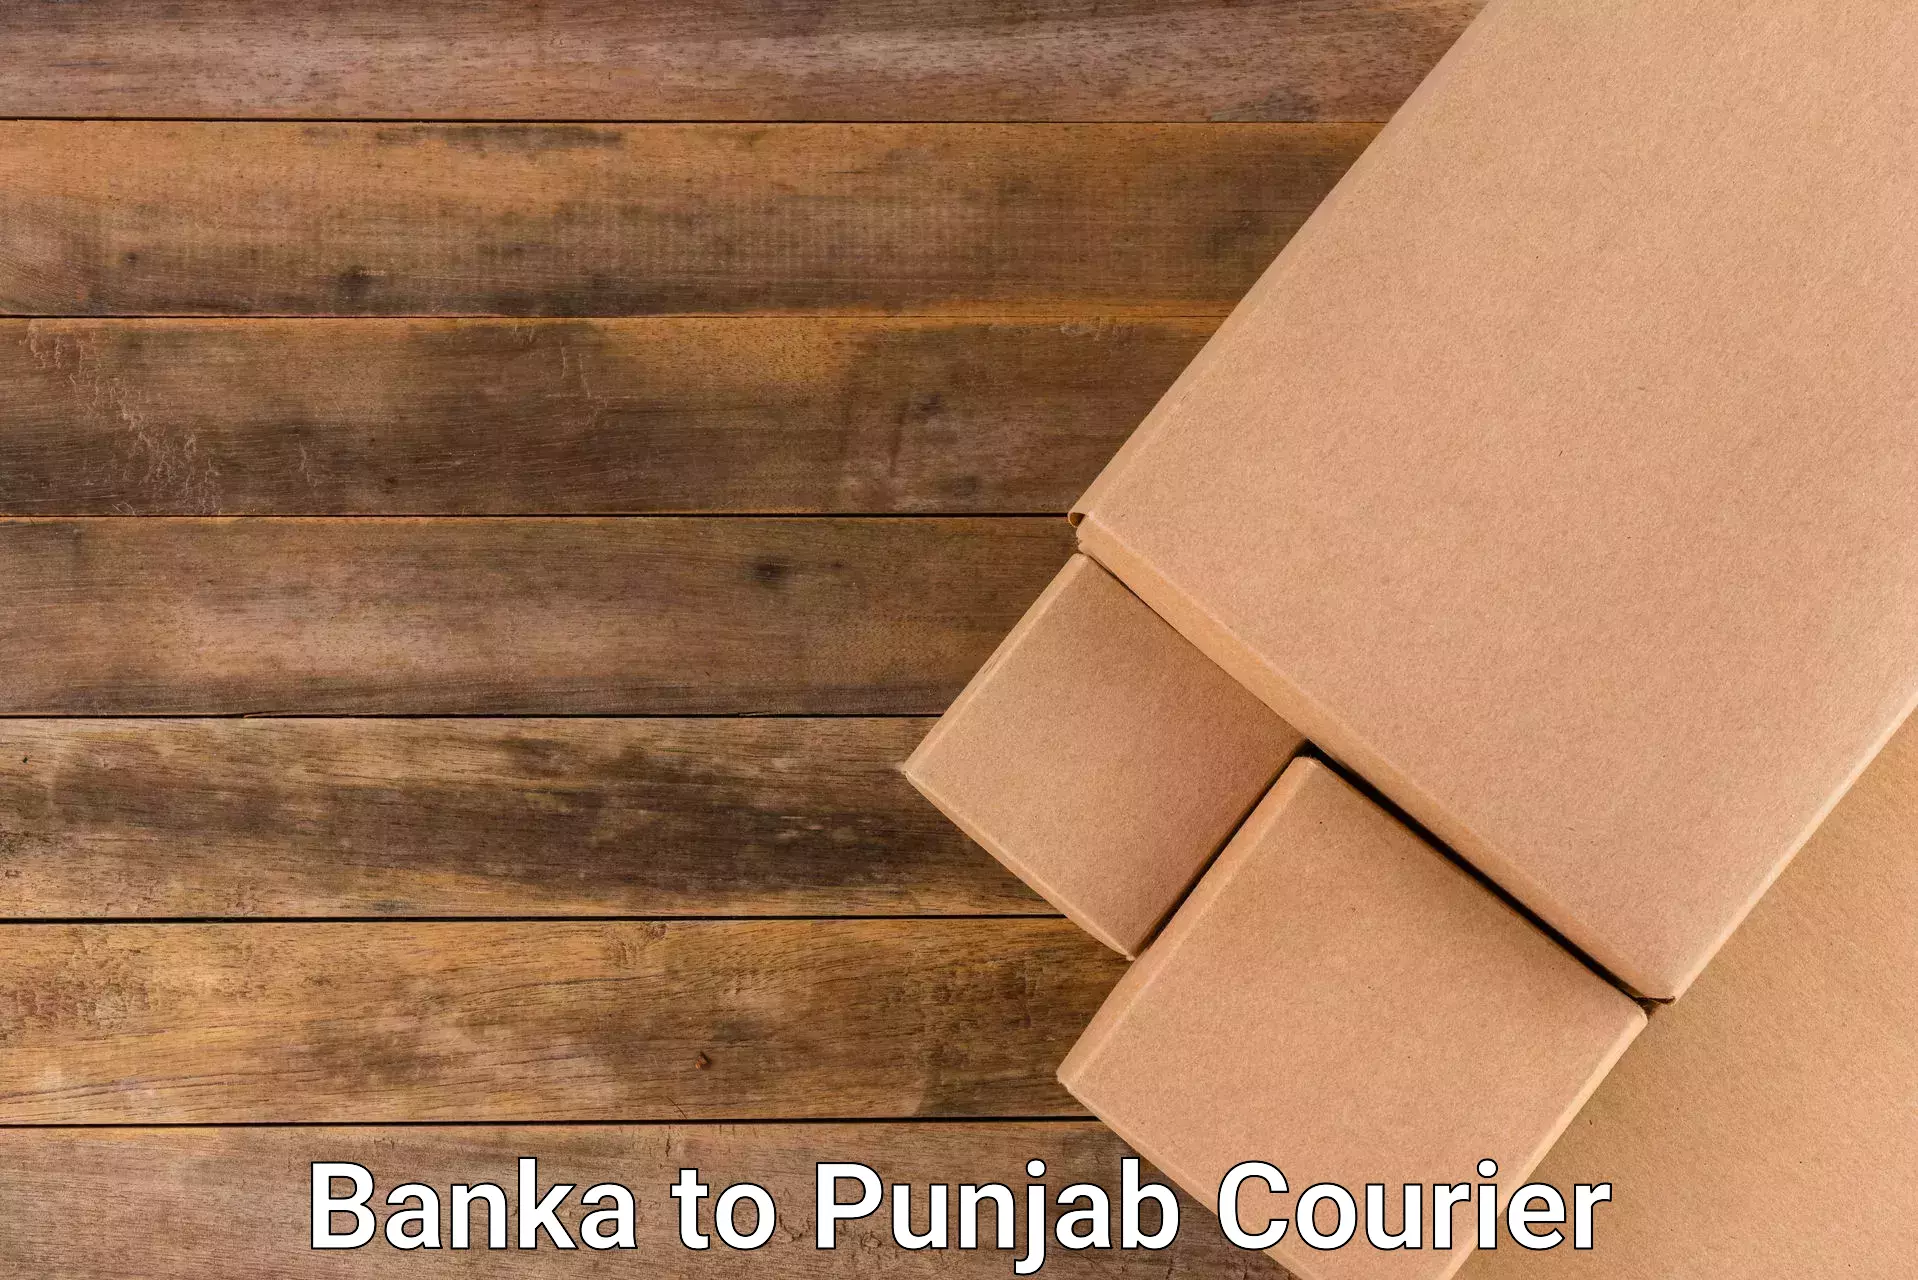 Cost-effective courier options Banka to Punjab